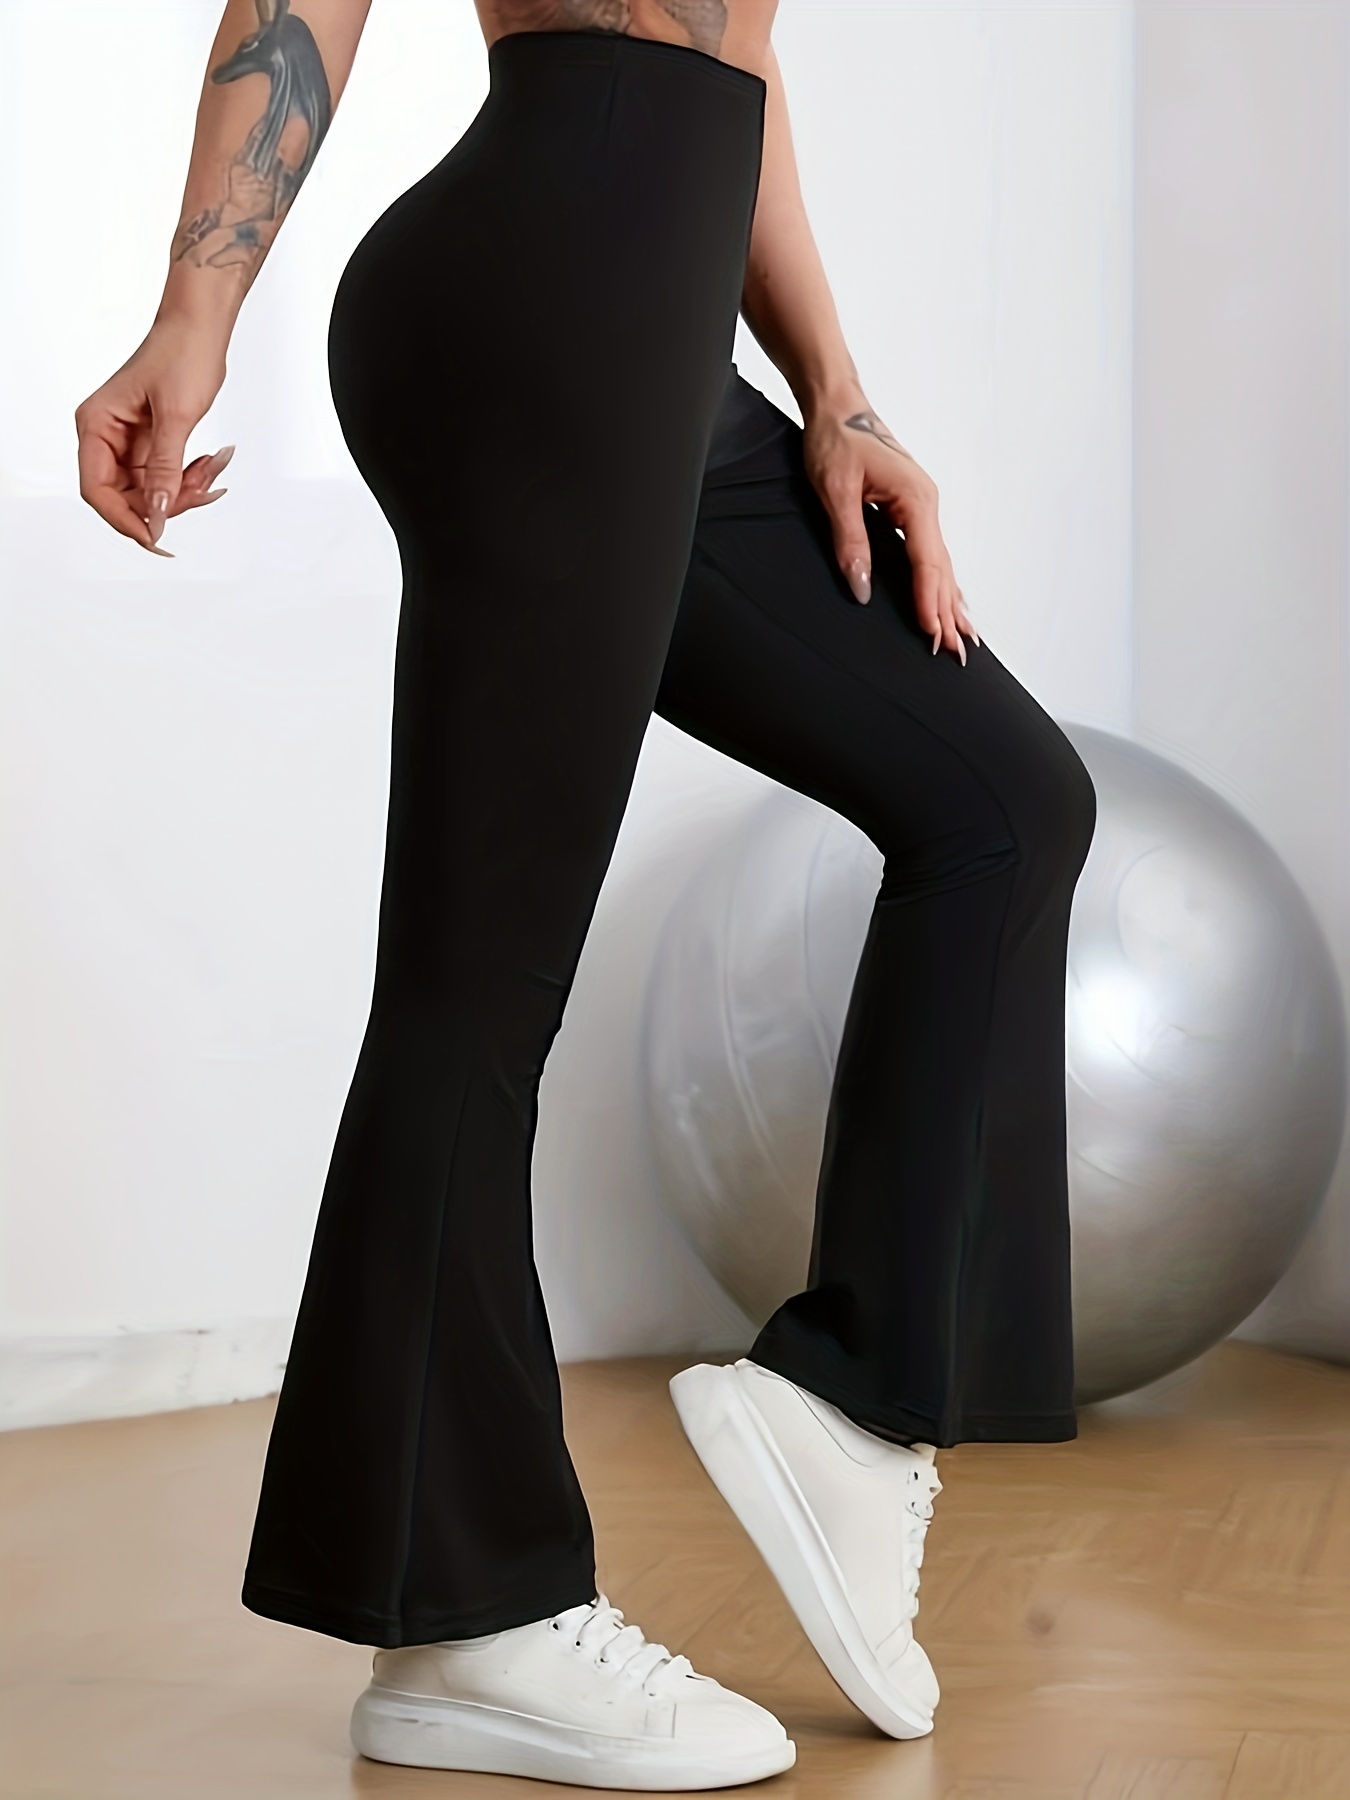 Faux Leather Leggings for Women Black Stretchy Tummy Control High Waisted  Flare Pants Slit Bell Bottom